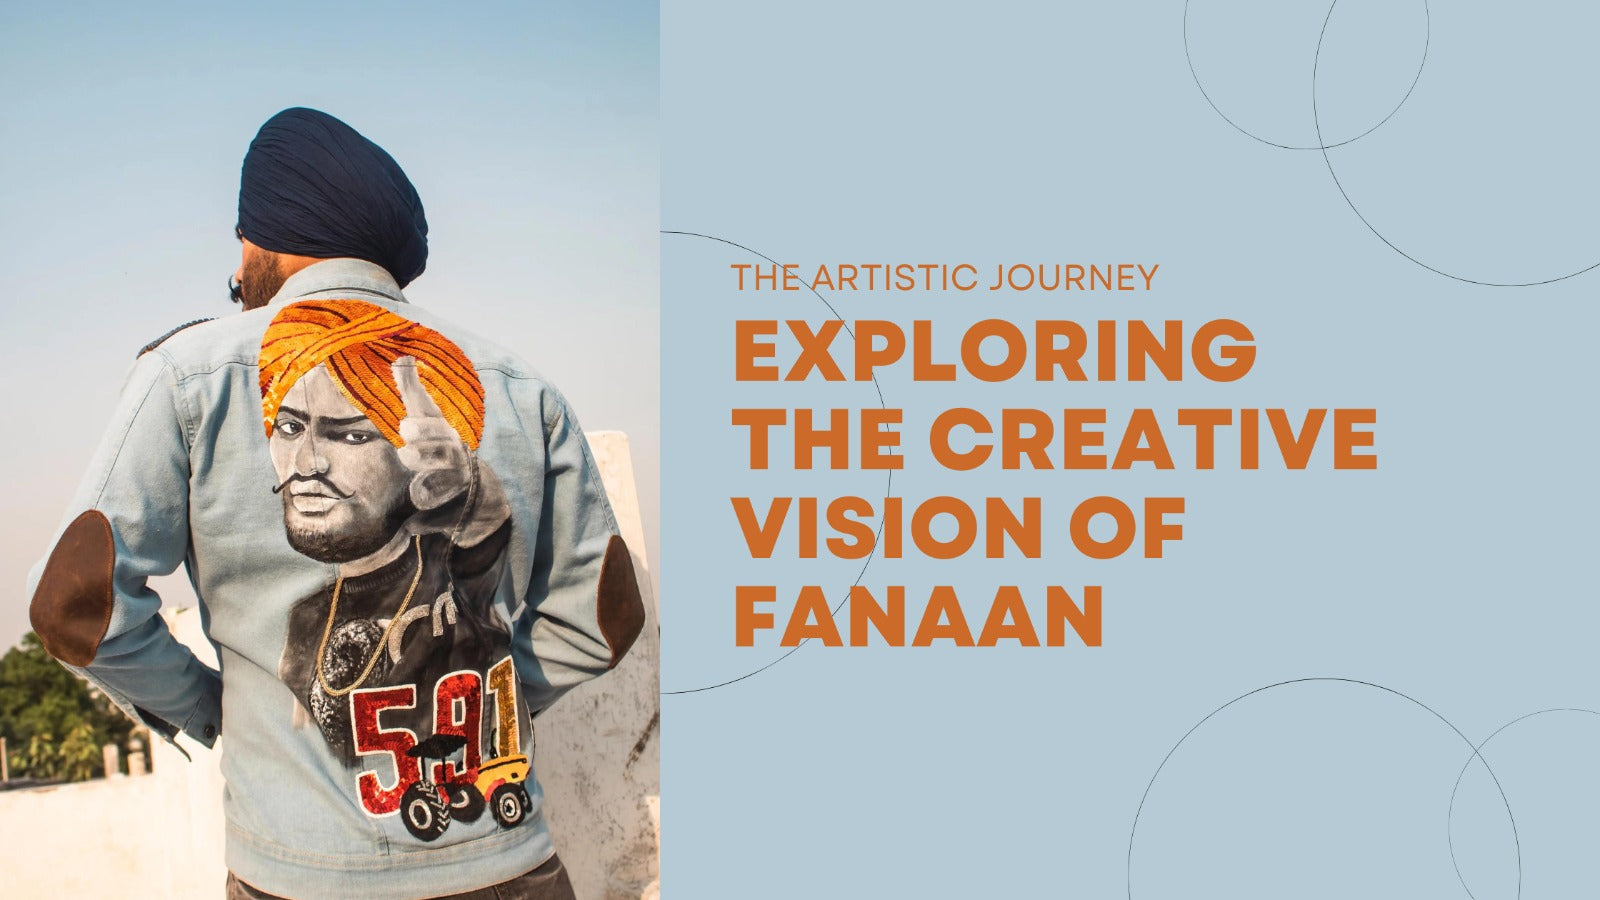 THE ARTISTIC JOURNEY: EXPLORING THE CREATIVE VISION OF FANAAN